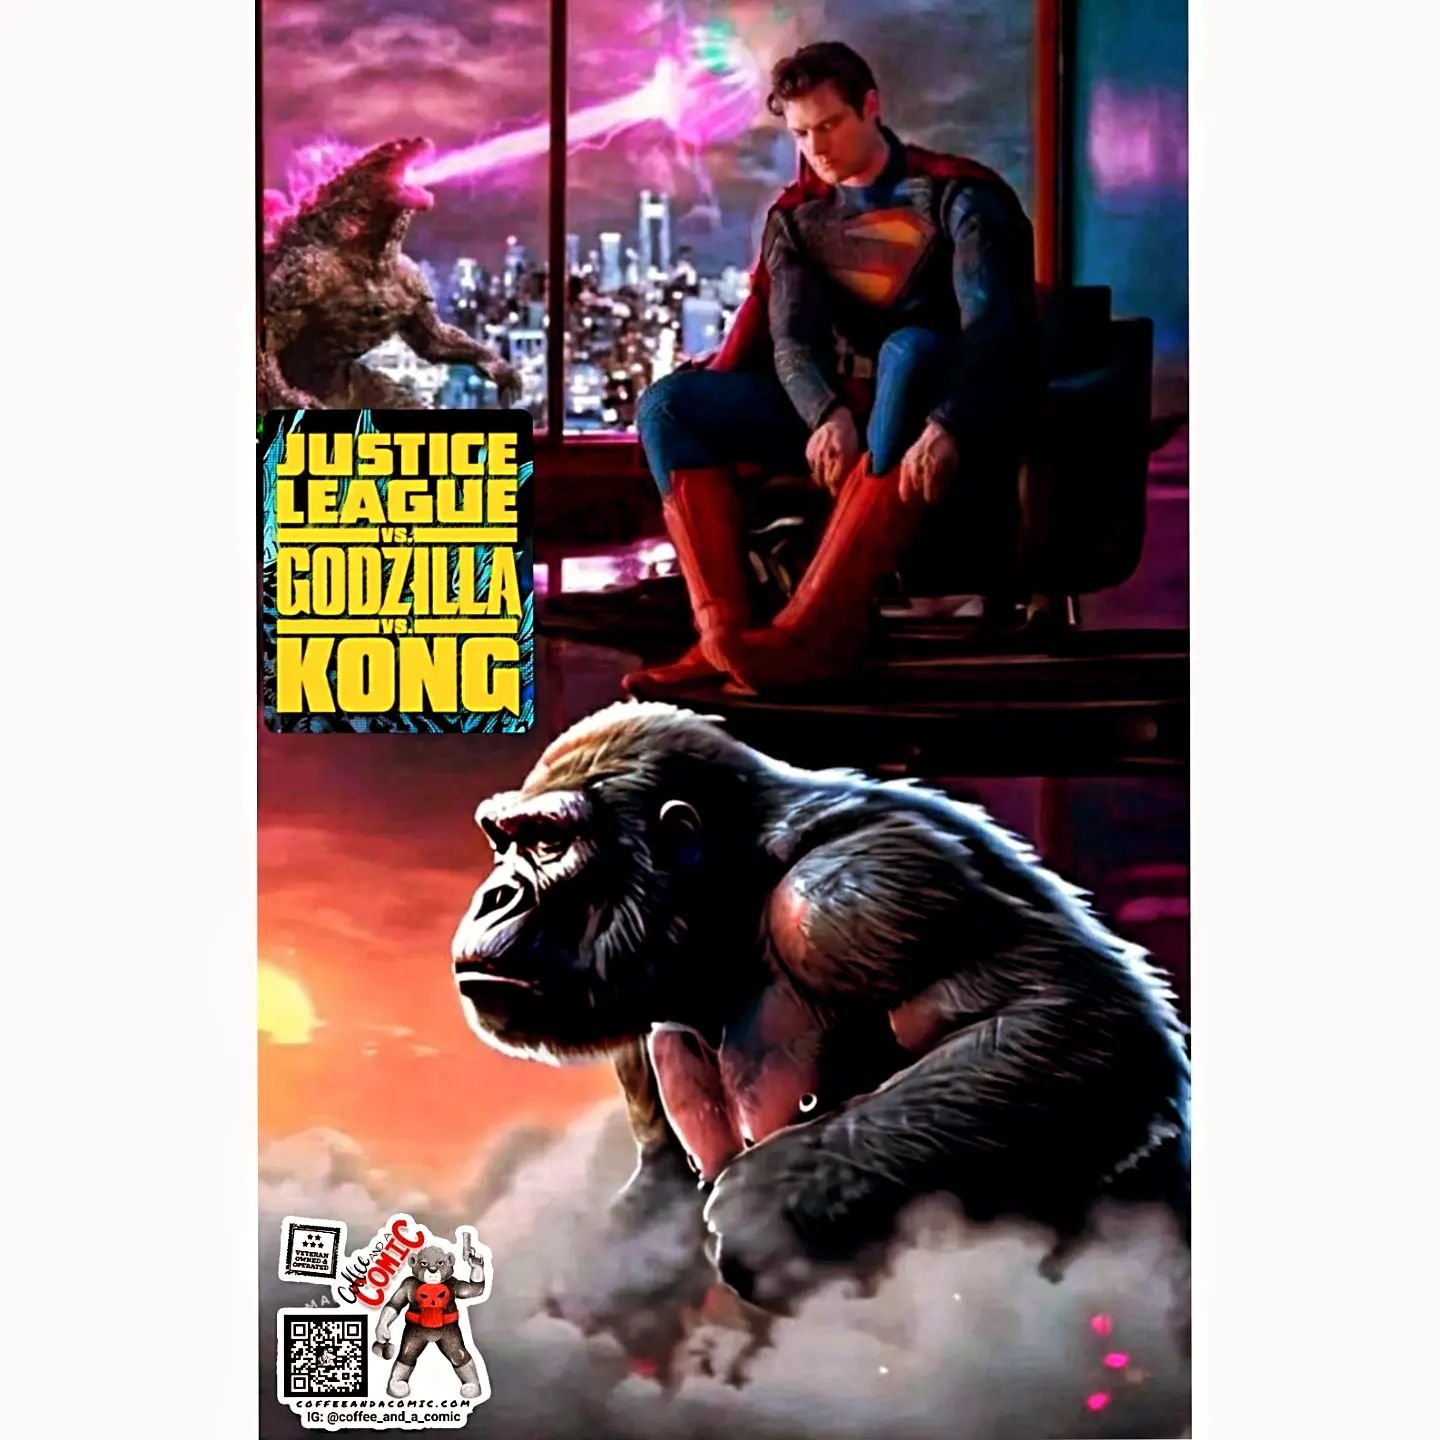 @davidcorenswet and @jamesgunn are hinting something 🤔 👀 🤣
This would be the movie of the ages!
#supermansuit #superman #justiceleaguevsgodzillavskong